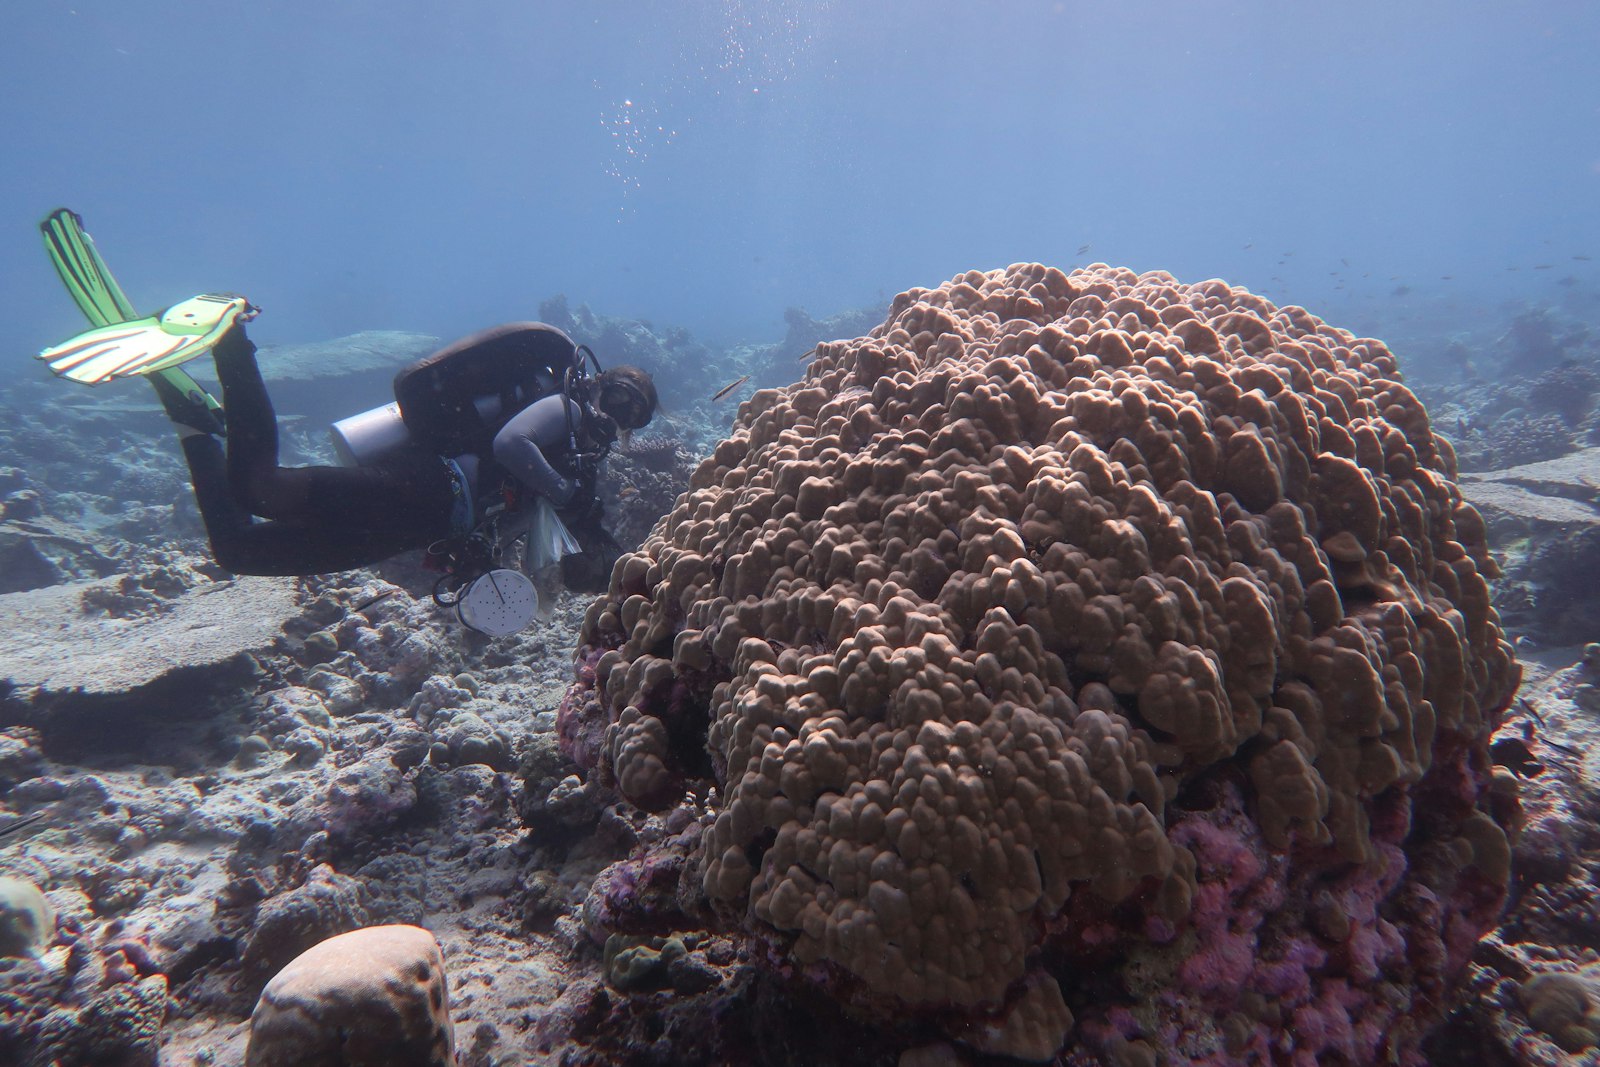 A scuba diver looks at coral reefs underwater